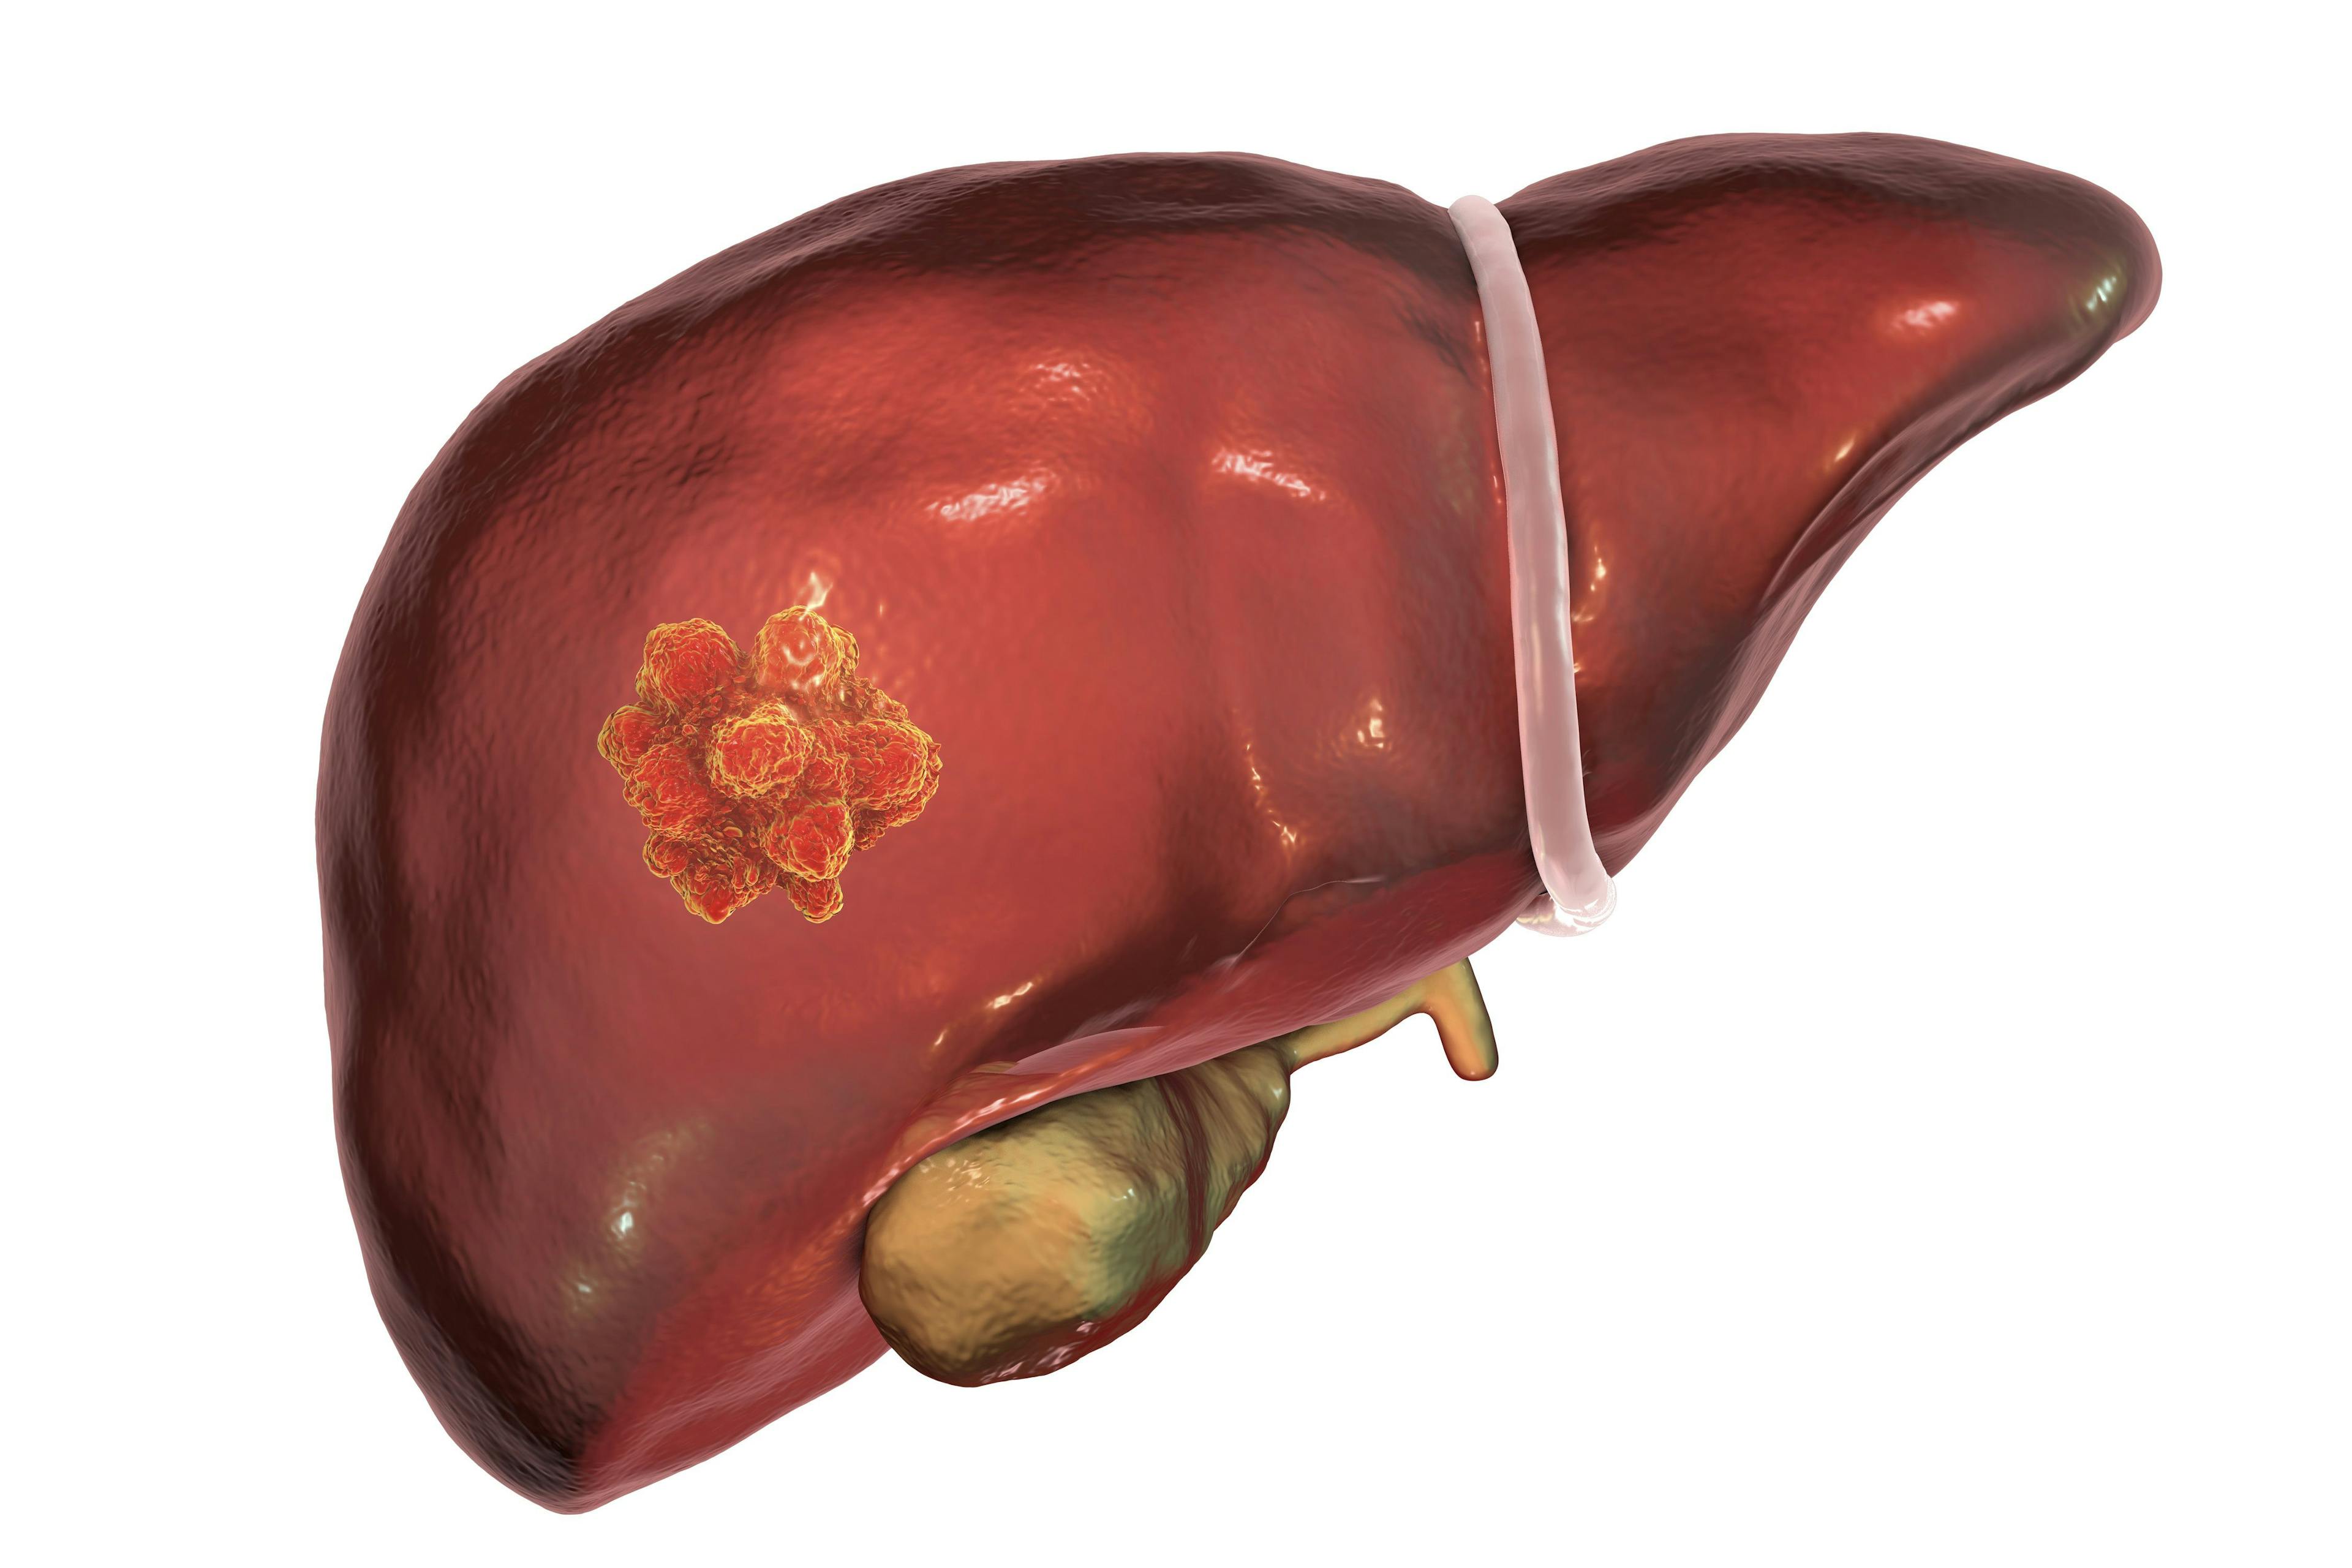 Treatment-emergent adverse effects following therapy with fostrox plus lenvatinib among those with hepatocellular carcinoma appear to be manageable in a phase 1a/2a study.